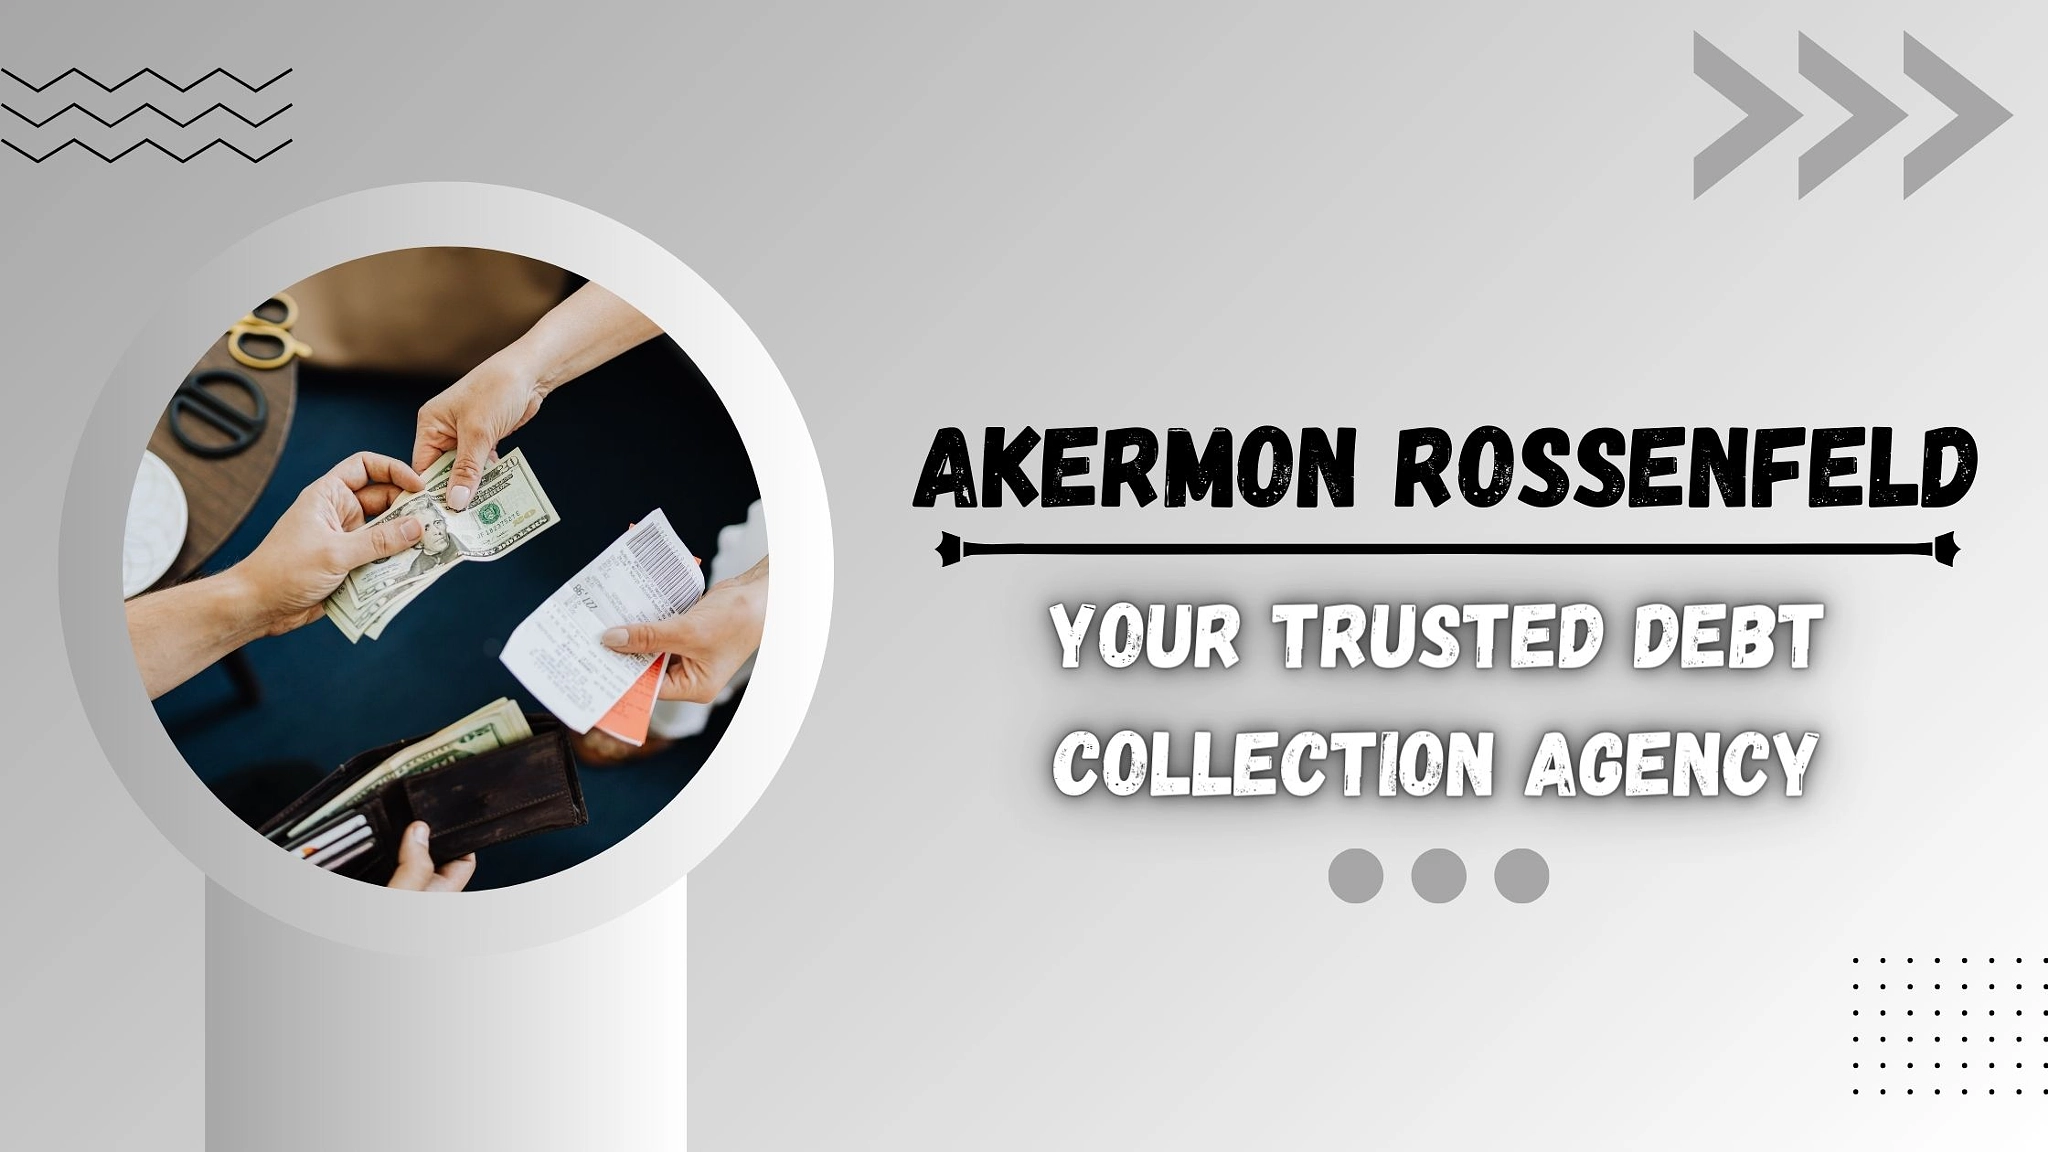 Akermon Rossenfeld - Your Trusted Debt Collection Agency - 1